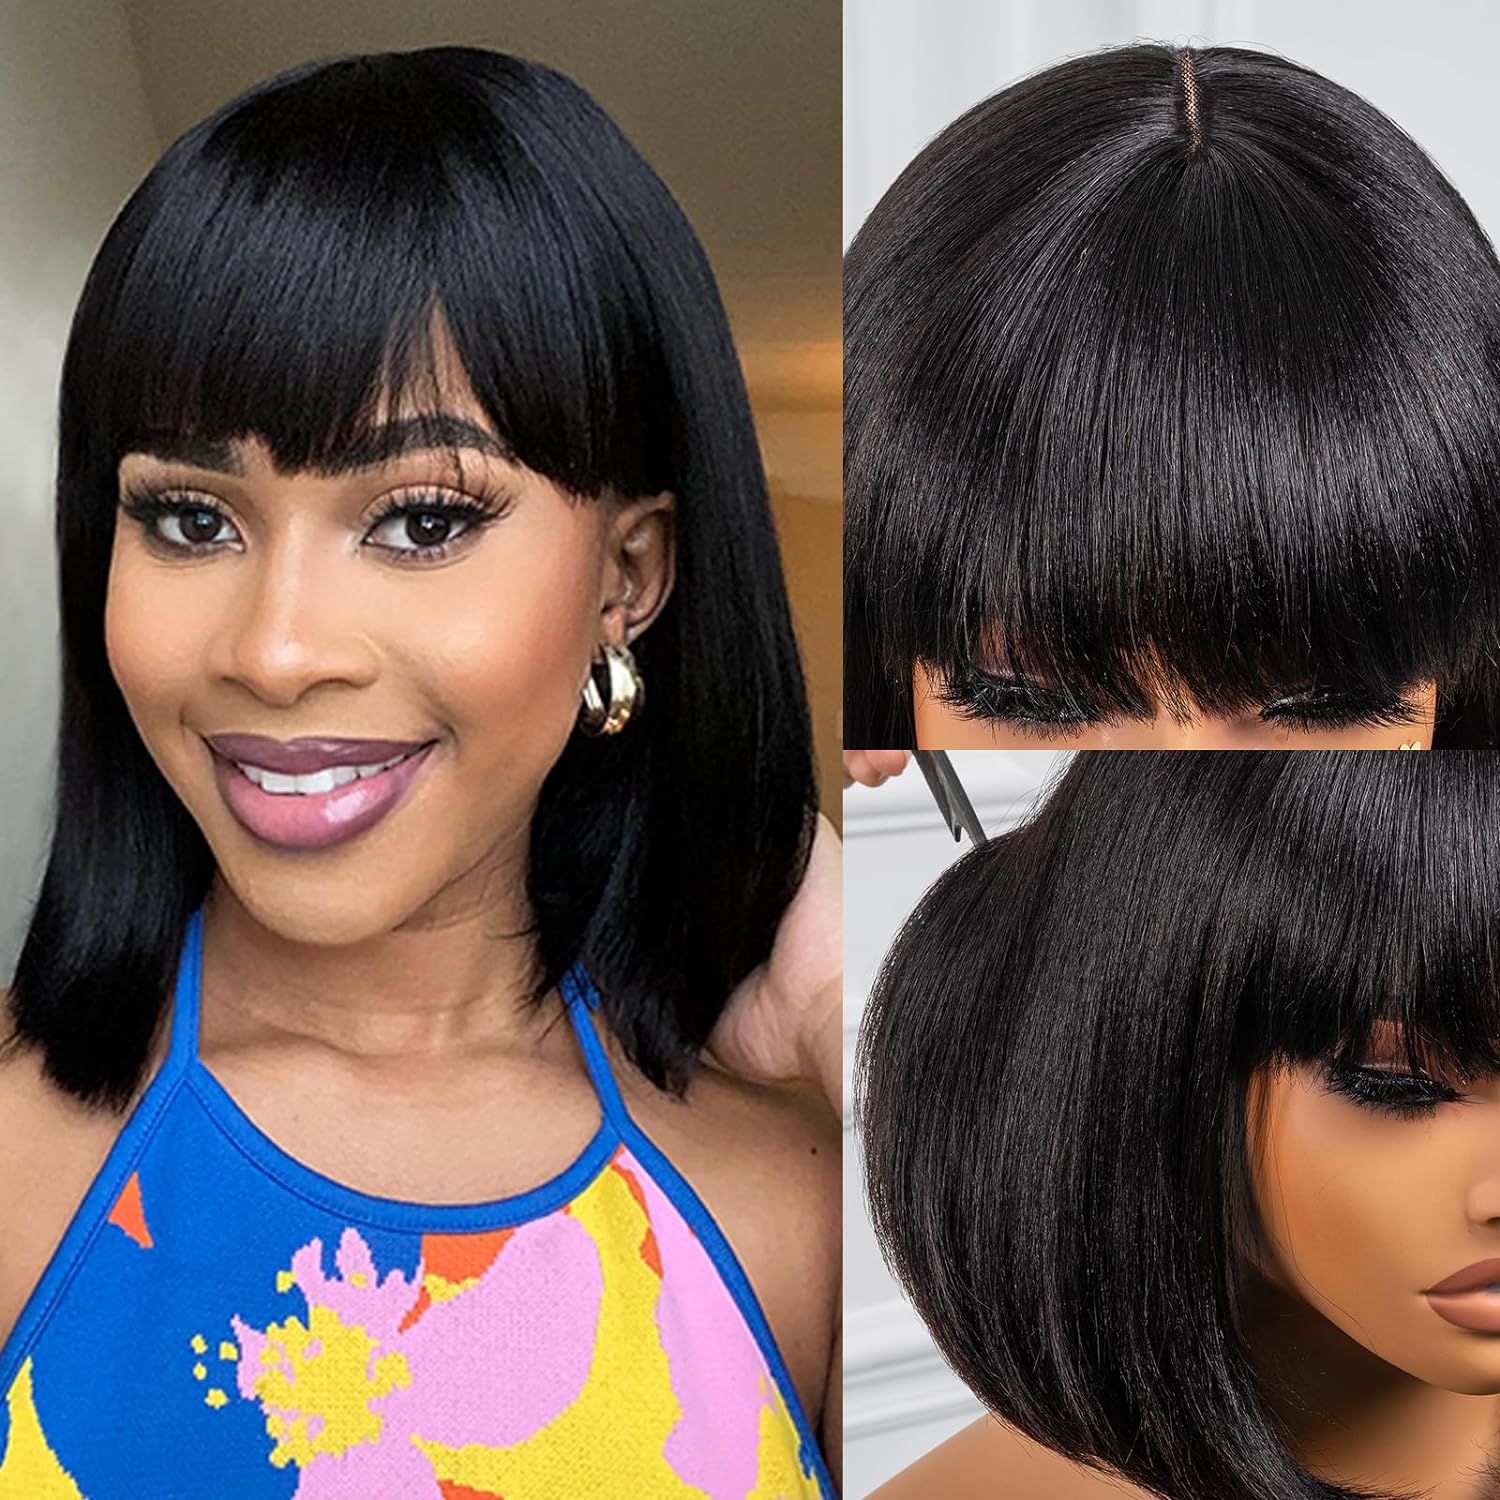 FAST SHIPPING 3-5 DAY HUMAN HAIR WIG |ToyoTress U-Part Bob Wigs Human Hair - Short Straight Clip In Wigs Glueless Wigs for Black Women Natural Black Light Yaki 100% Brazilian Virgin Hair Middle or Side part (8 Inch 1B)